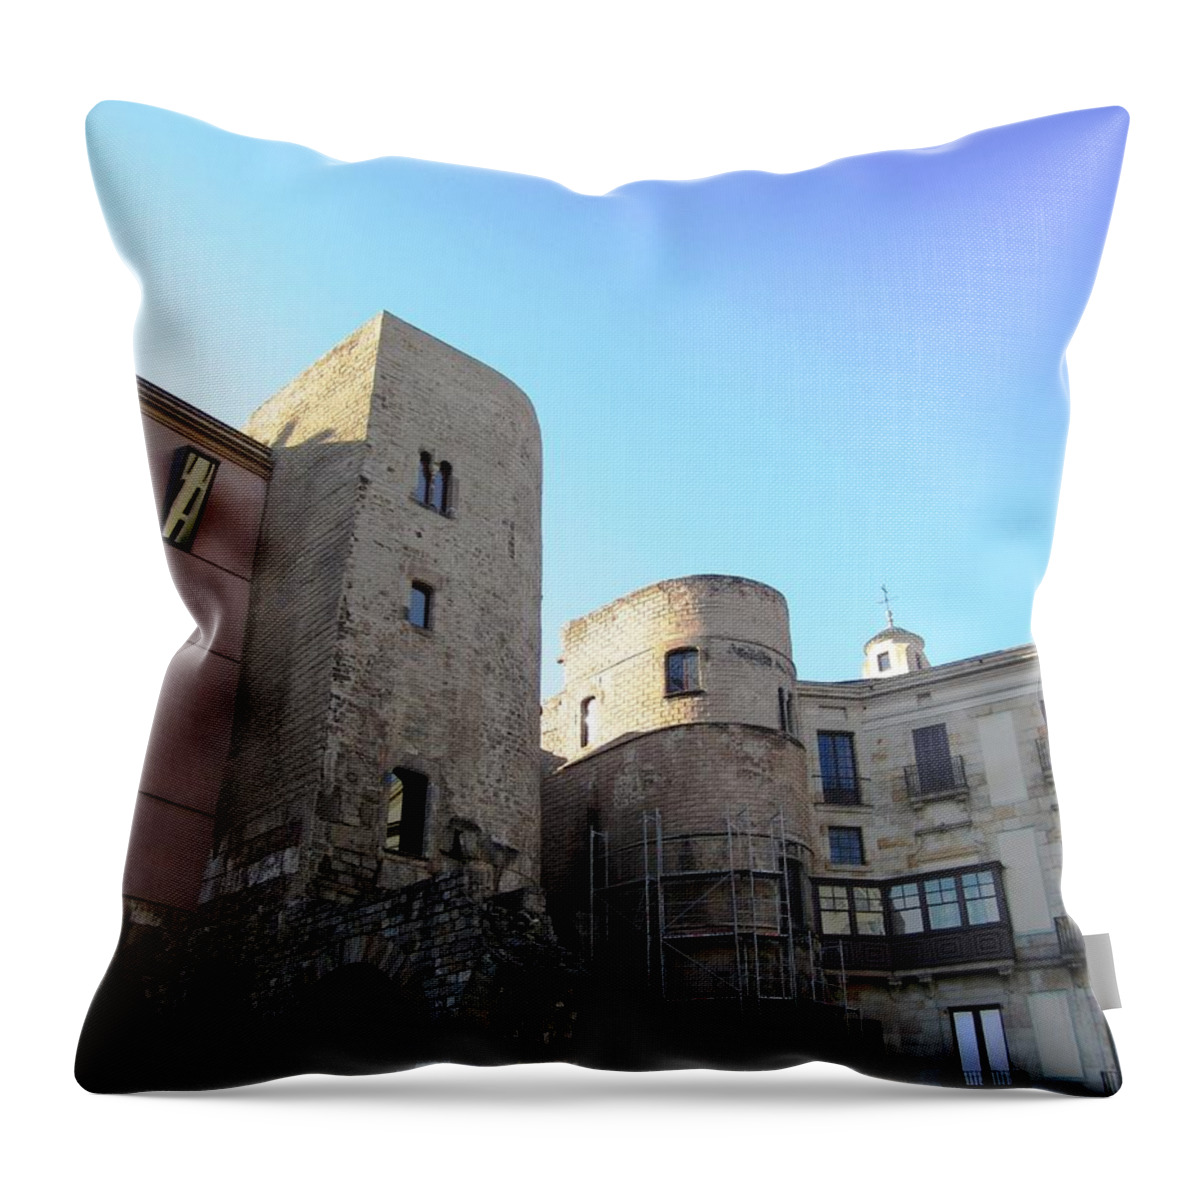 Barcelona Throw Pillow featuring the photograph Ancient Brick Building Architecture in Barcelona Spain by John Shiron